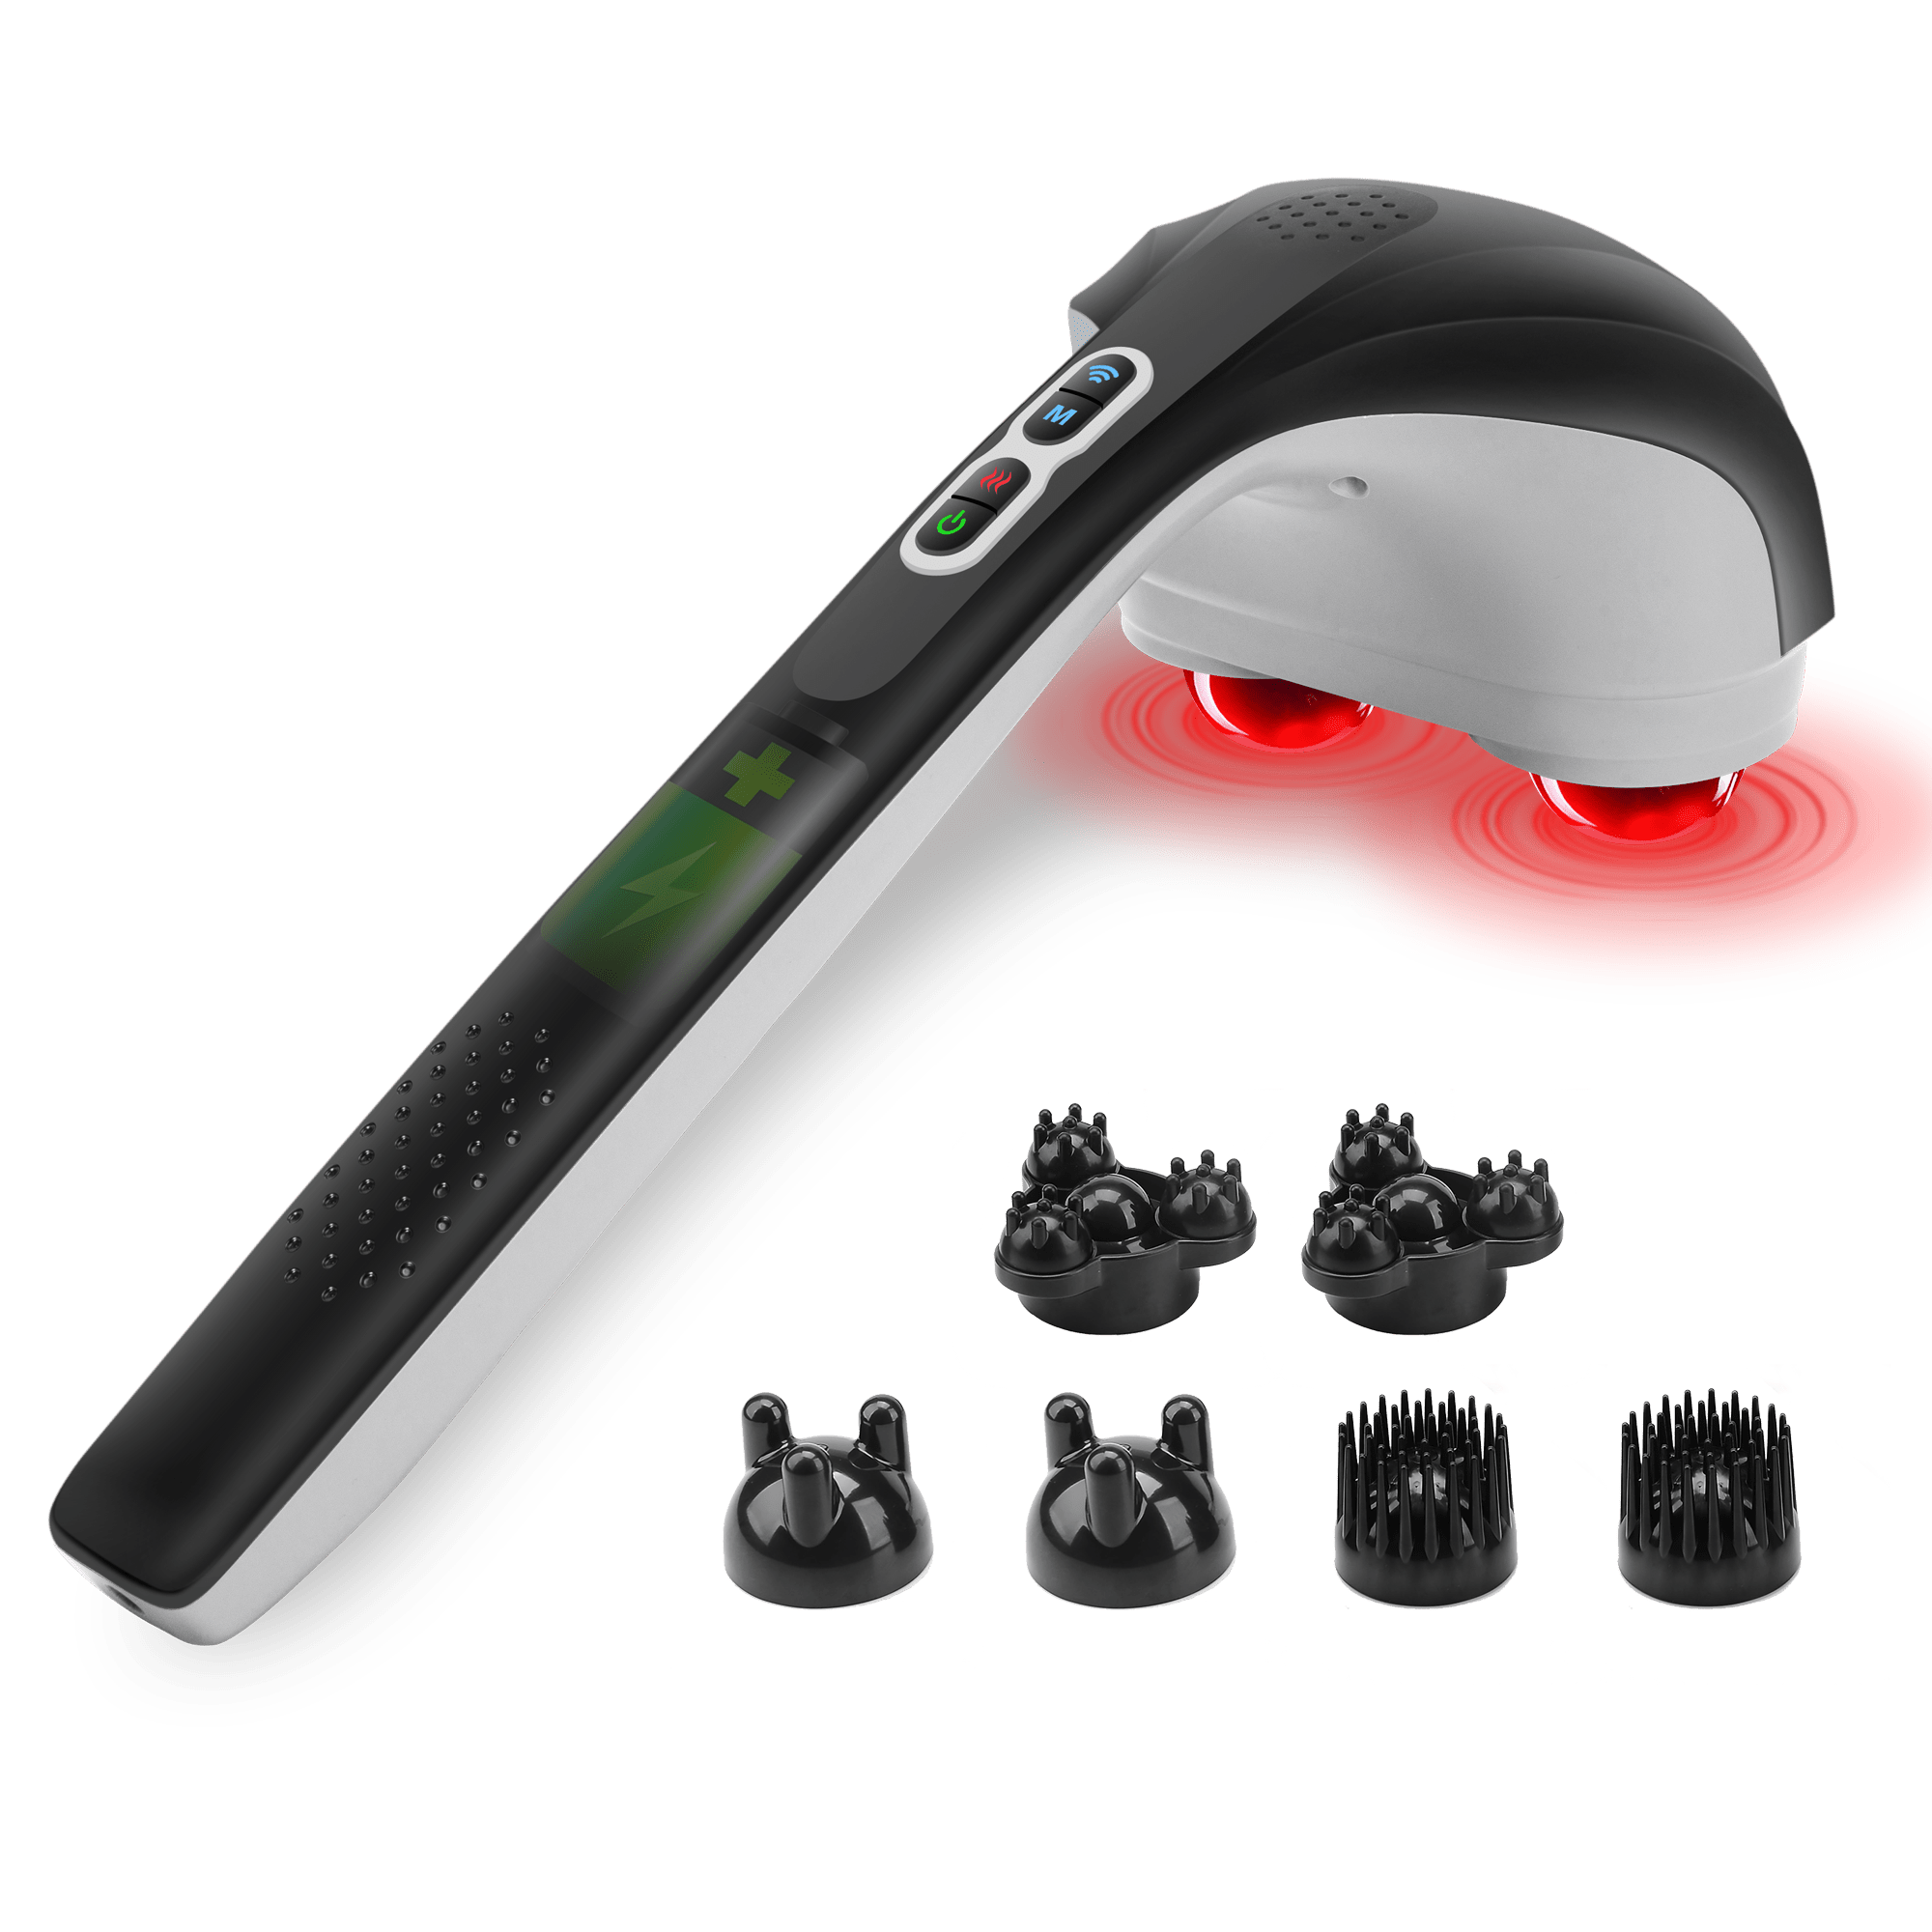 Snailax® Cordless Dual Heads Percussion Handheld Massager with Heat - 498